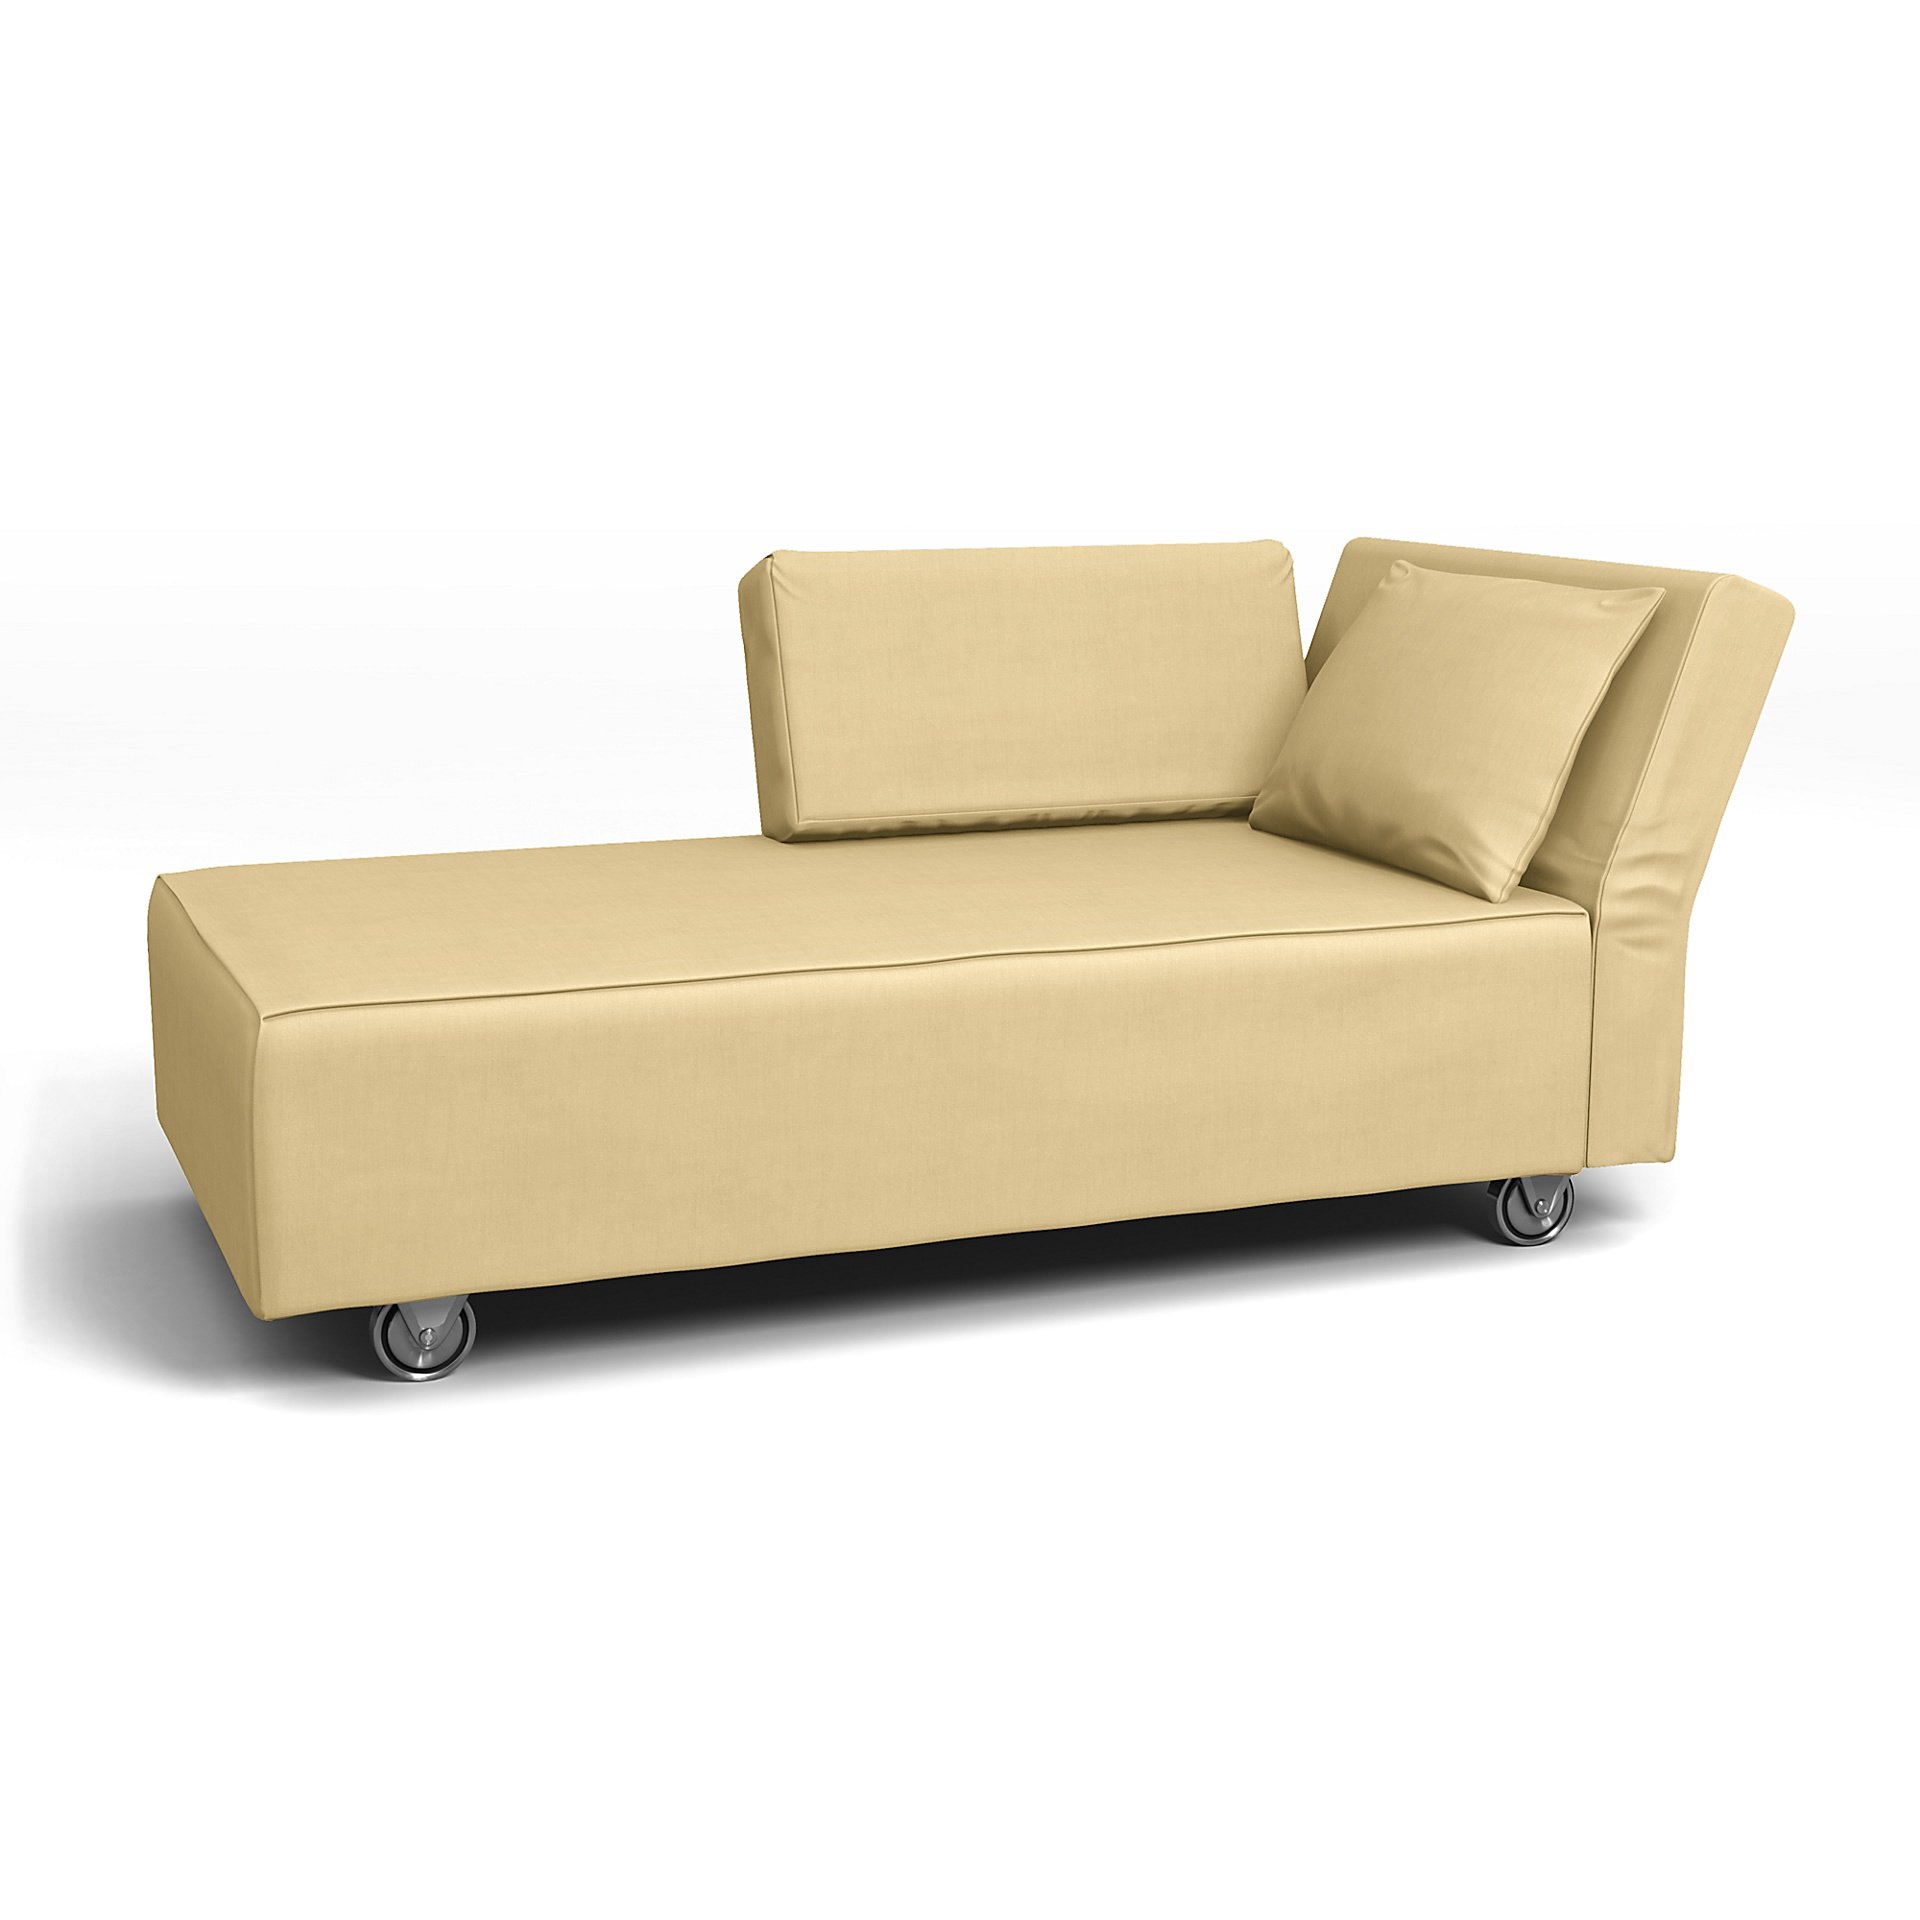 IKEA - Falsterbo Chaise with Right Armrest Cover, Straw Yellow, Linen - Bemz